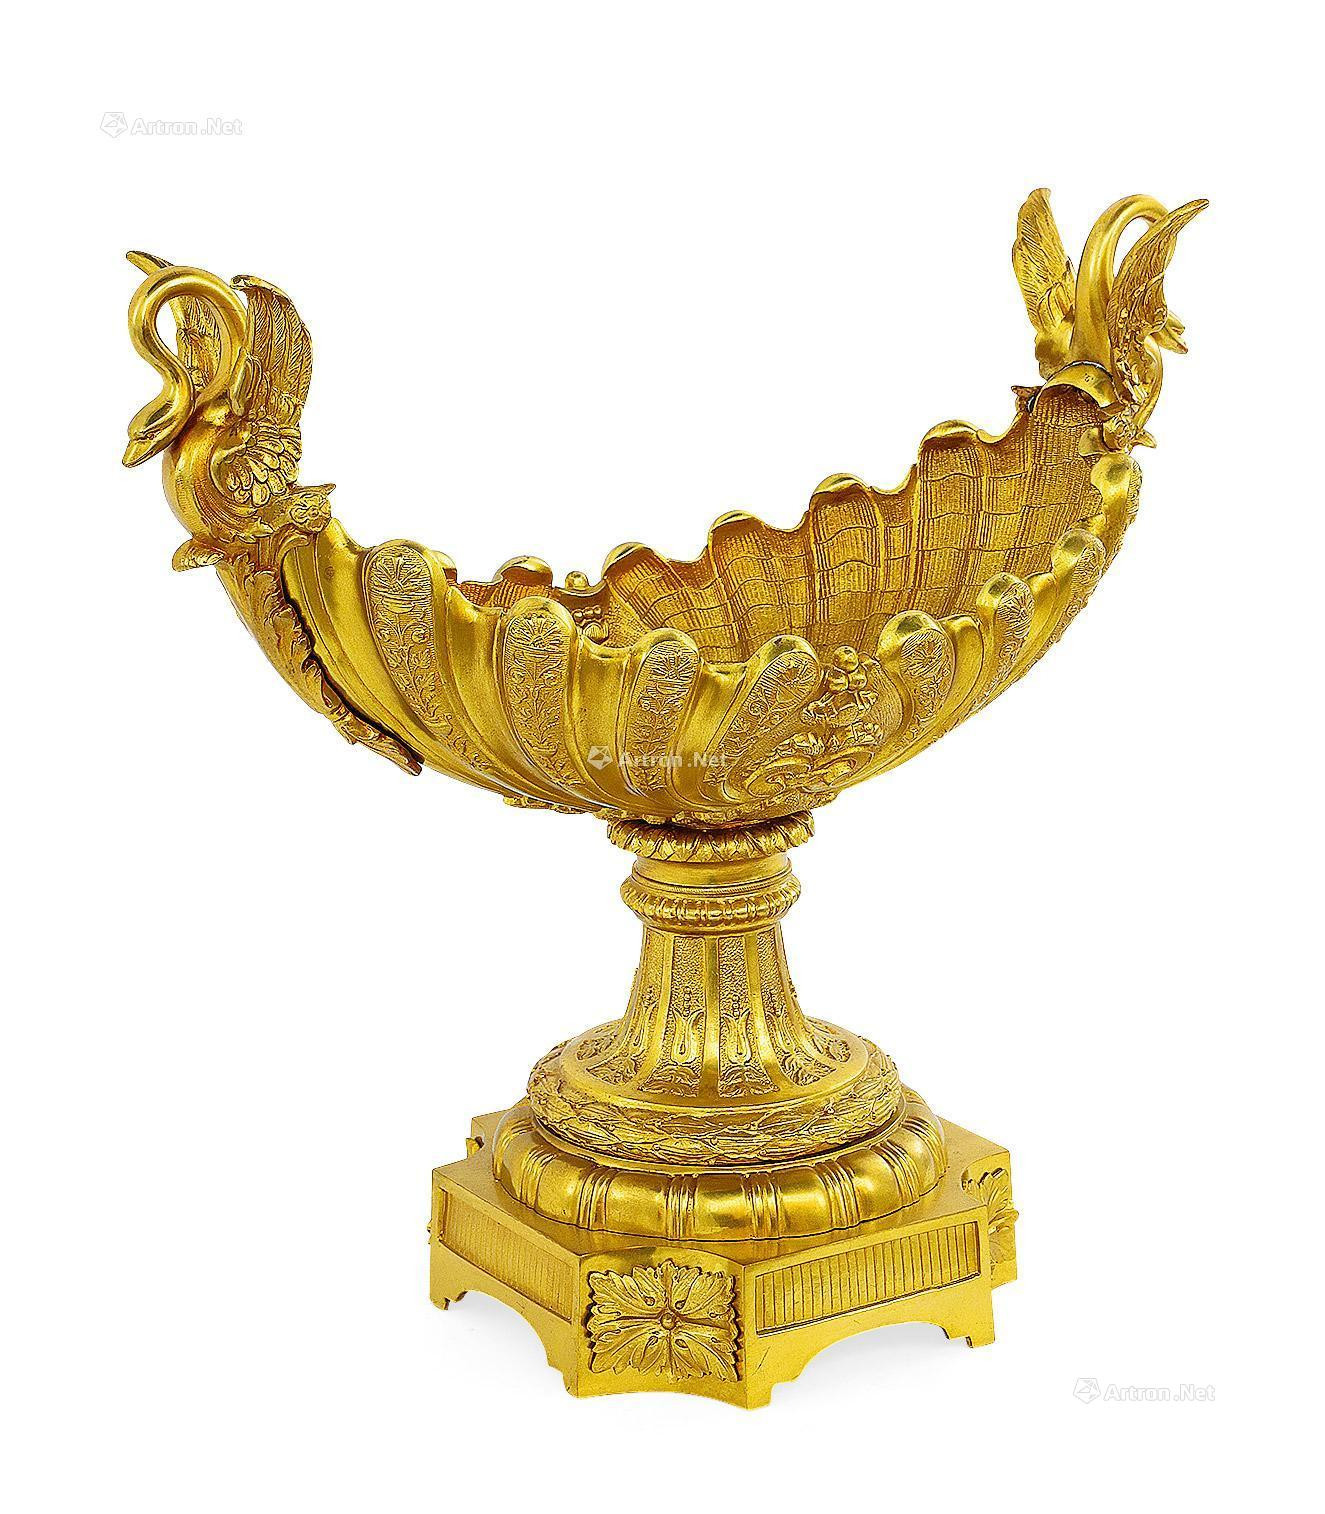 A FRENCH EMPIRE STYLE GILT BRONZE DECORATIVE URN